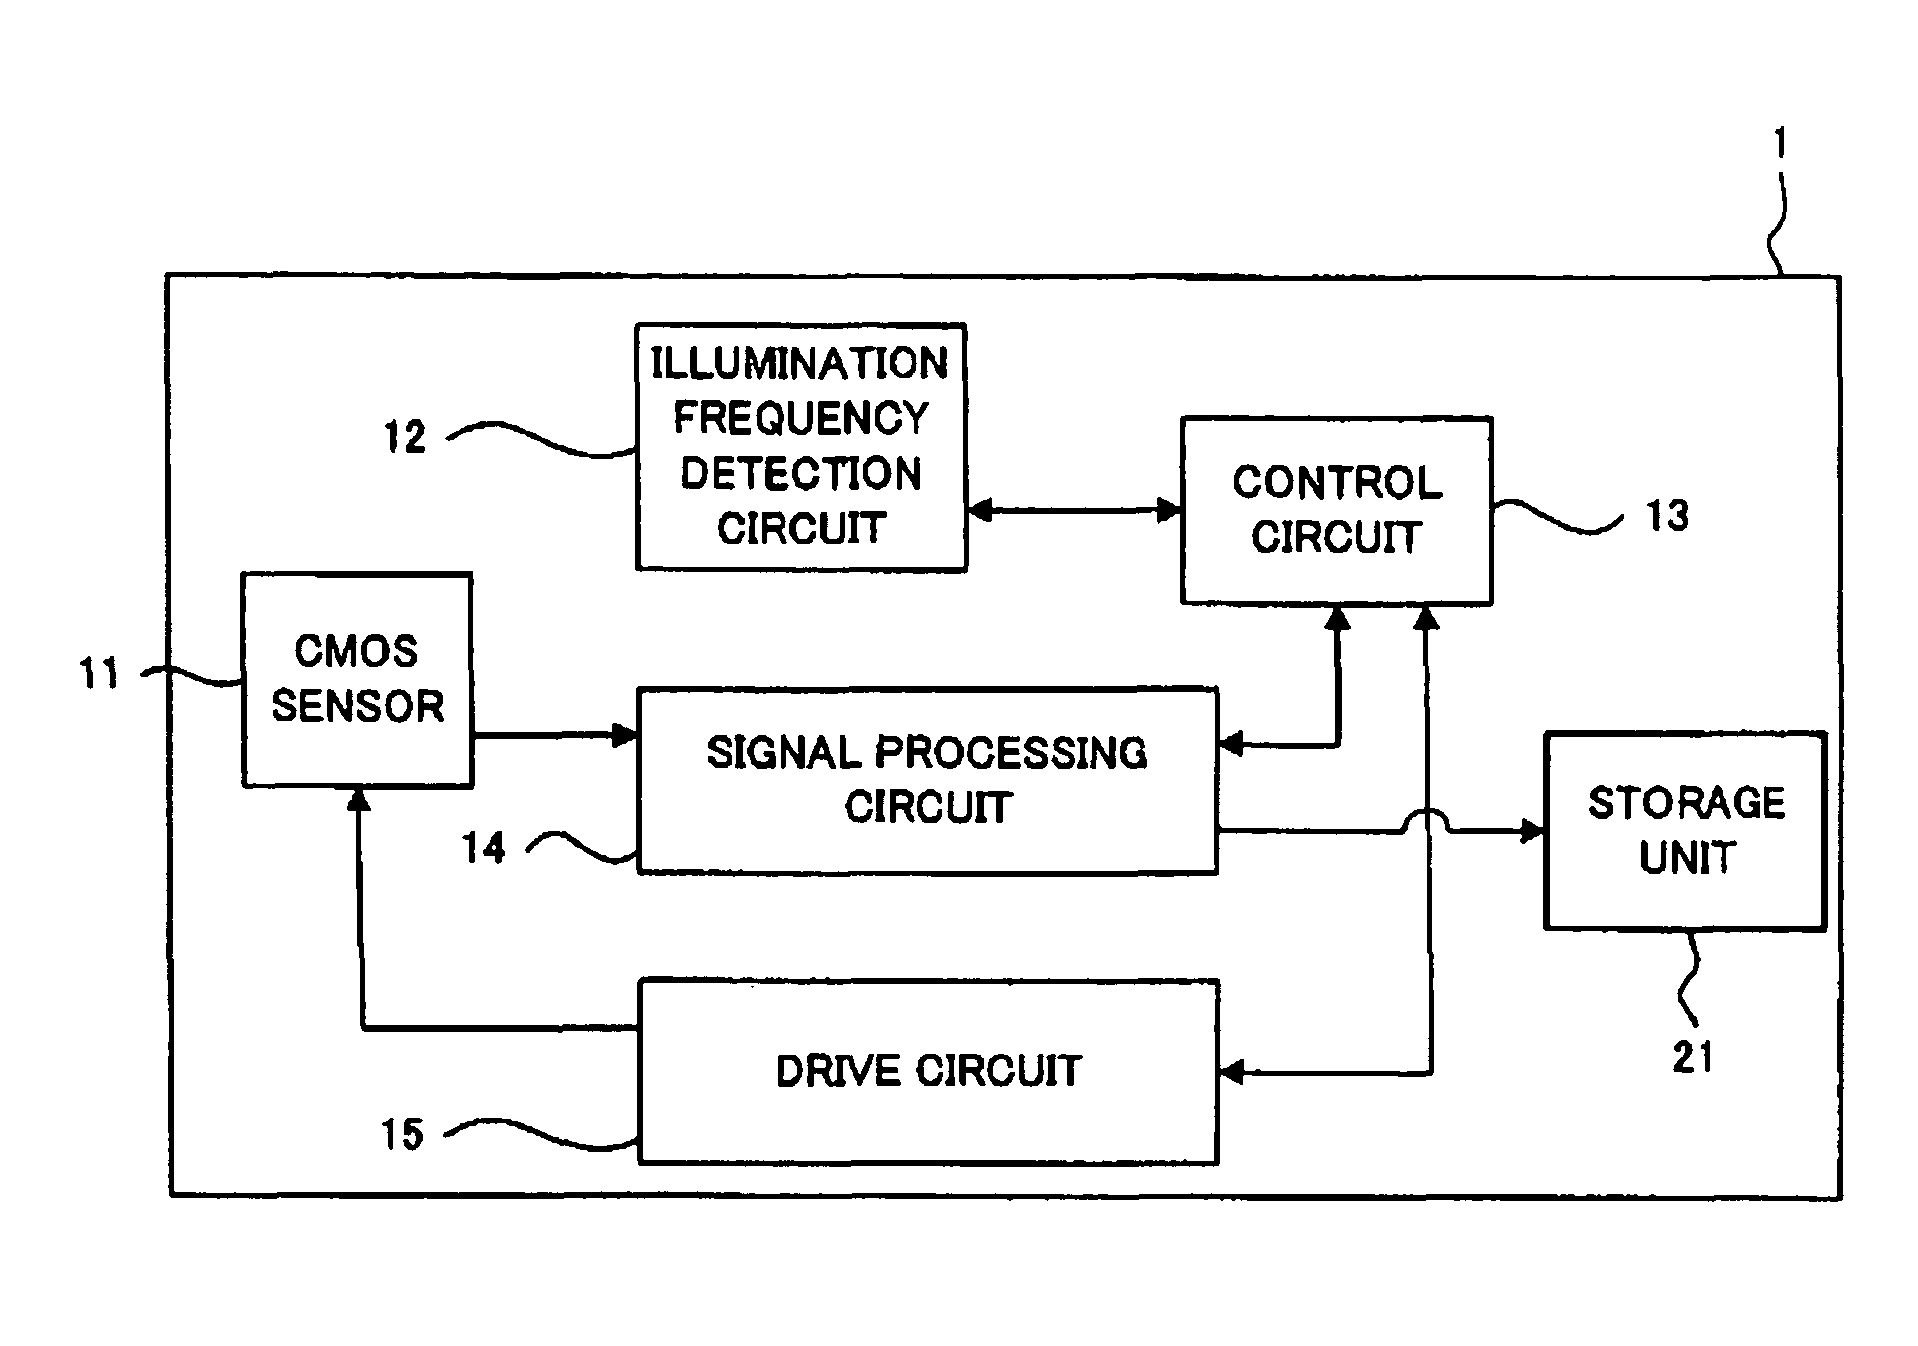 Solid state imaging device for correcting level variations in output signals